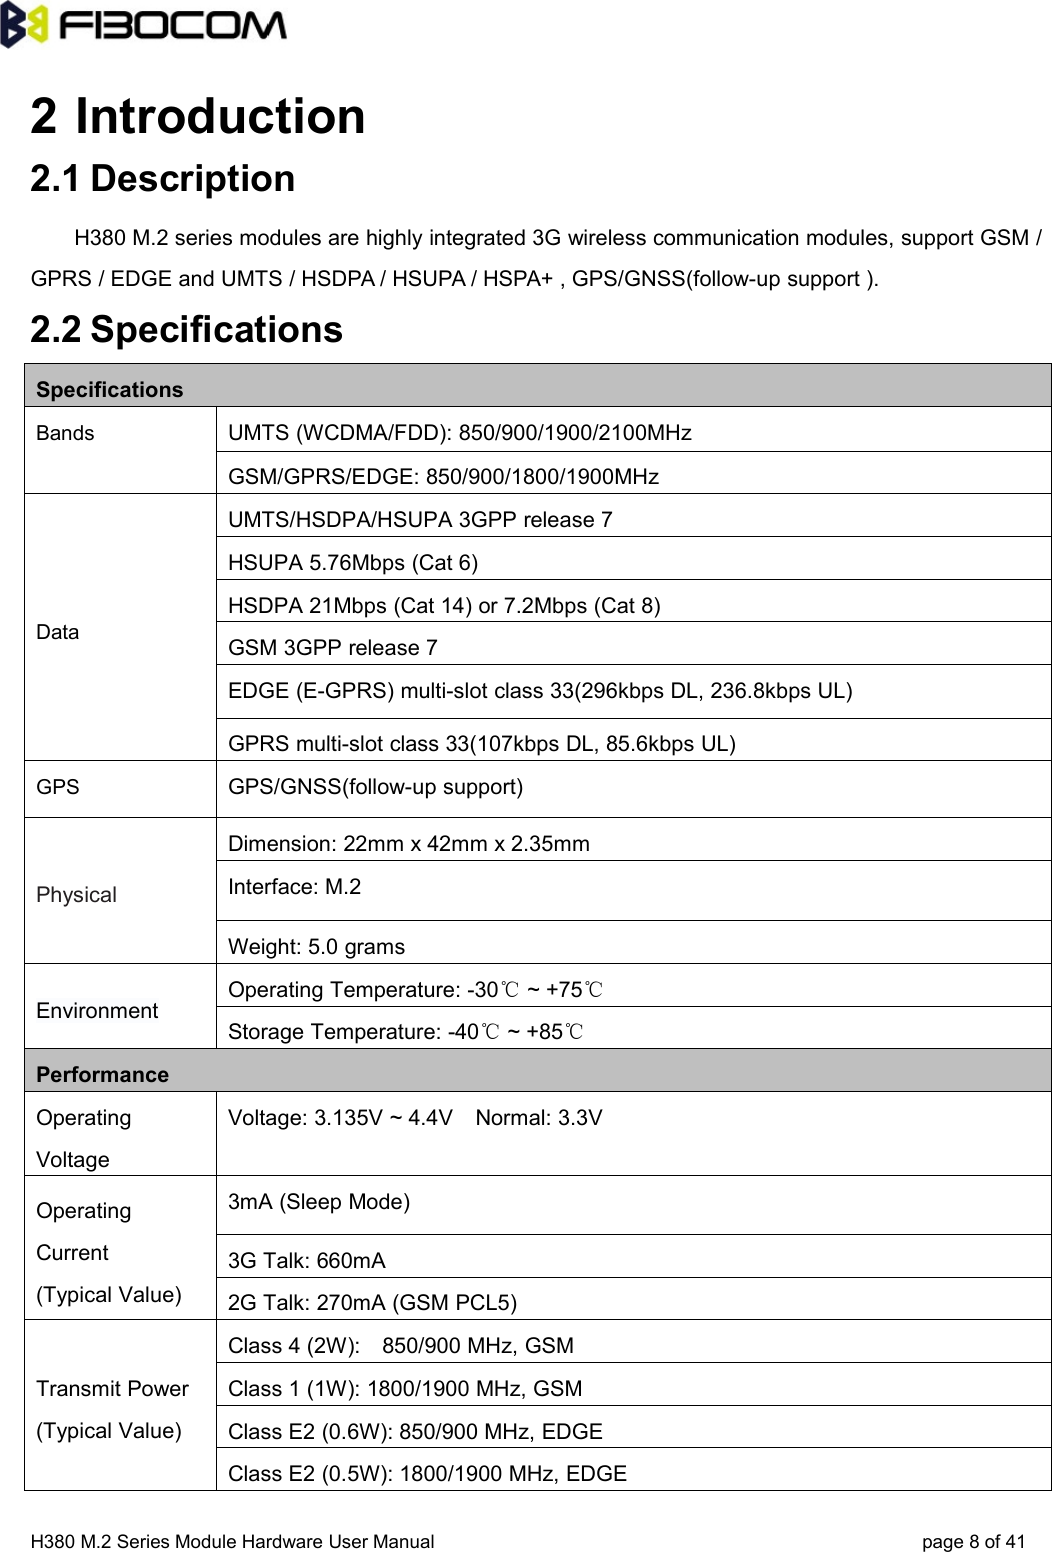 H380 M.2 Series Module Hardware User Manual page 8of 412 Introduction2.1 DescriptionH380 M.2 series modules are highly integrated 3G wireless communication modules, support GSM /GPRS / EDGE and UMTS / HSDPA / HSUPA / HSPA+ , GPS/GNSS(follow-up support ).2.2 SpecificationsSpecificationsBands UMTS (WCDMA/FDD): 850/900/1900/2100MHzGSM/GPRS/EDGE: 850/900/1800/1900MHzDataUMTS/HSDPA/HSUPA 3GPP release 7HSUPA 5.76Mbps (Cat 6)HSDPA 21Mbps (Cat 14) or 7.2Mbps (Cat 8)GSM 3GPP release 7EDGE (E-GPRS) multi-slot class 33(296kbps DL, 236.8kbps UL)GPRS multi-slot class 33(107kbps DL, 85.6kbps UL)GPS GPS/GNSS(follow-up support)PhysicalDimension: 22mm x 42mm x 2.35mmInterface: M.2Weight: 5.0 gramsEnvironmentOperating Temperature: -30℃~ +75℃Storage Temperature: -40℃~ +85℃PerformanceOperatingVoltageVoltage: 3.135V ~ 4.4V Normal: 3.3VOperatingCurrent(Typical Value)3mA (Sleep Mode)3G Talk: 660mA2G Talk: 270mA (GSM PCL5)Transmit Power(Typical Value)Class 4 (2W): 850/900 MHz, GSMClass 1 (1W): 1800/1900 MHz, GSMClass E2 (0.6W): 850/900 MHz, EDGEClass E2 (0.5W): 1800/1900 MHz, EDGE